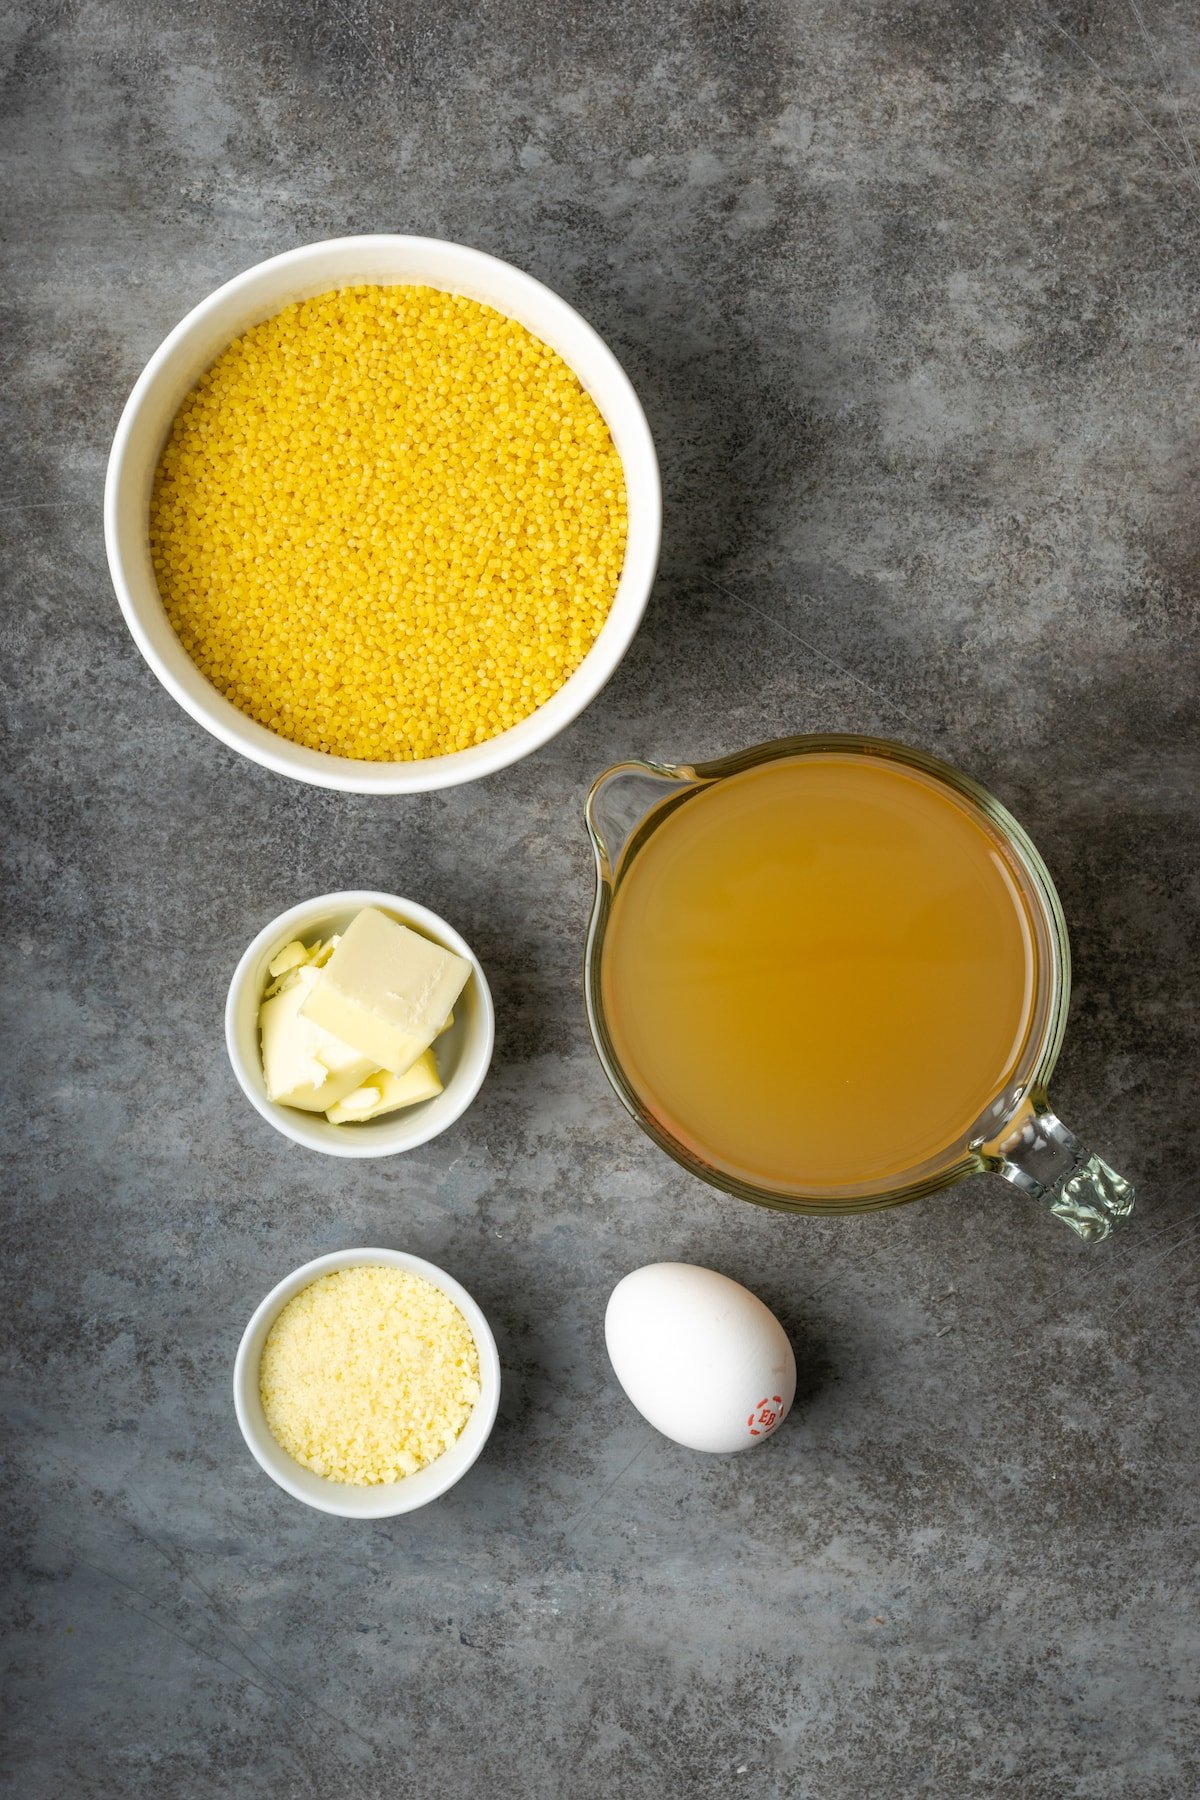 The ingredients for homemade Italian pastina.